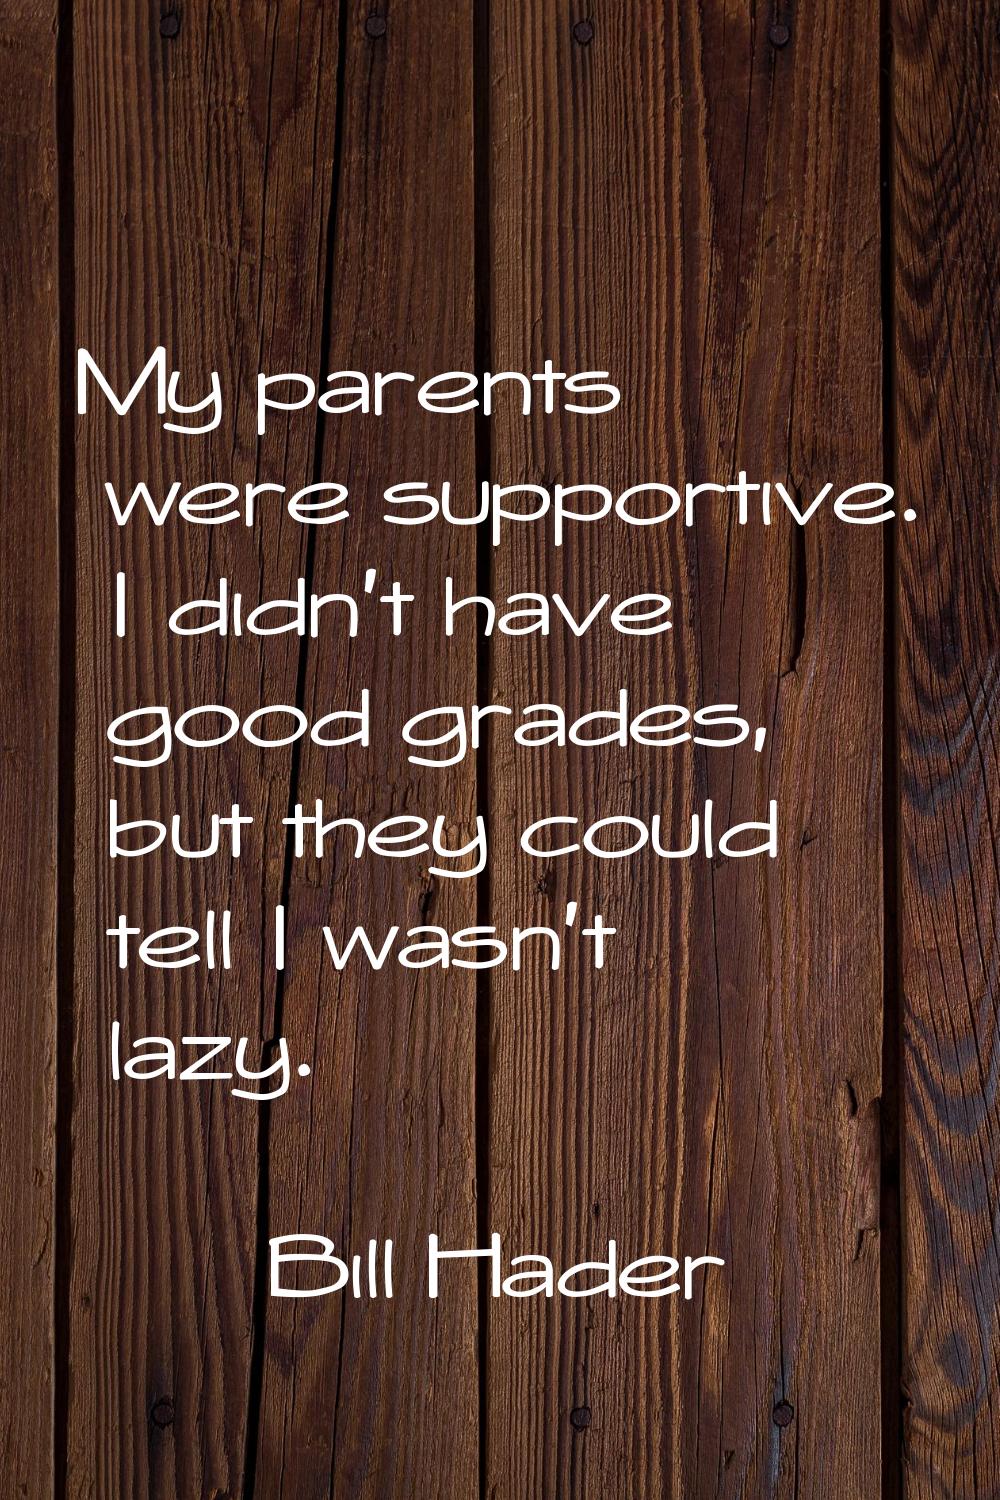 My parents were supportive. I didn't have good grades, but they could tell I wasn't lazy.